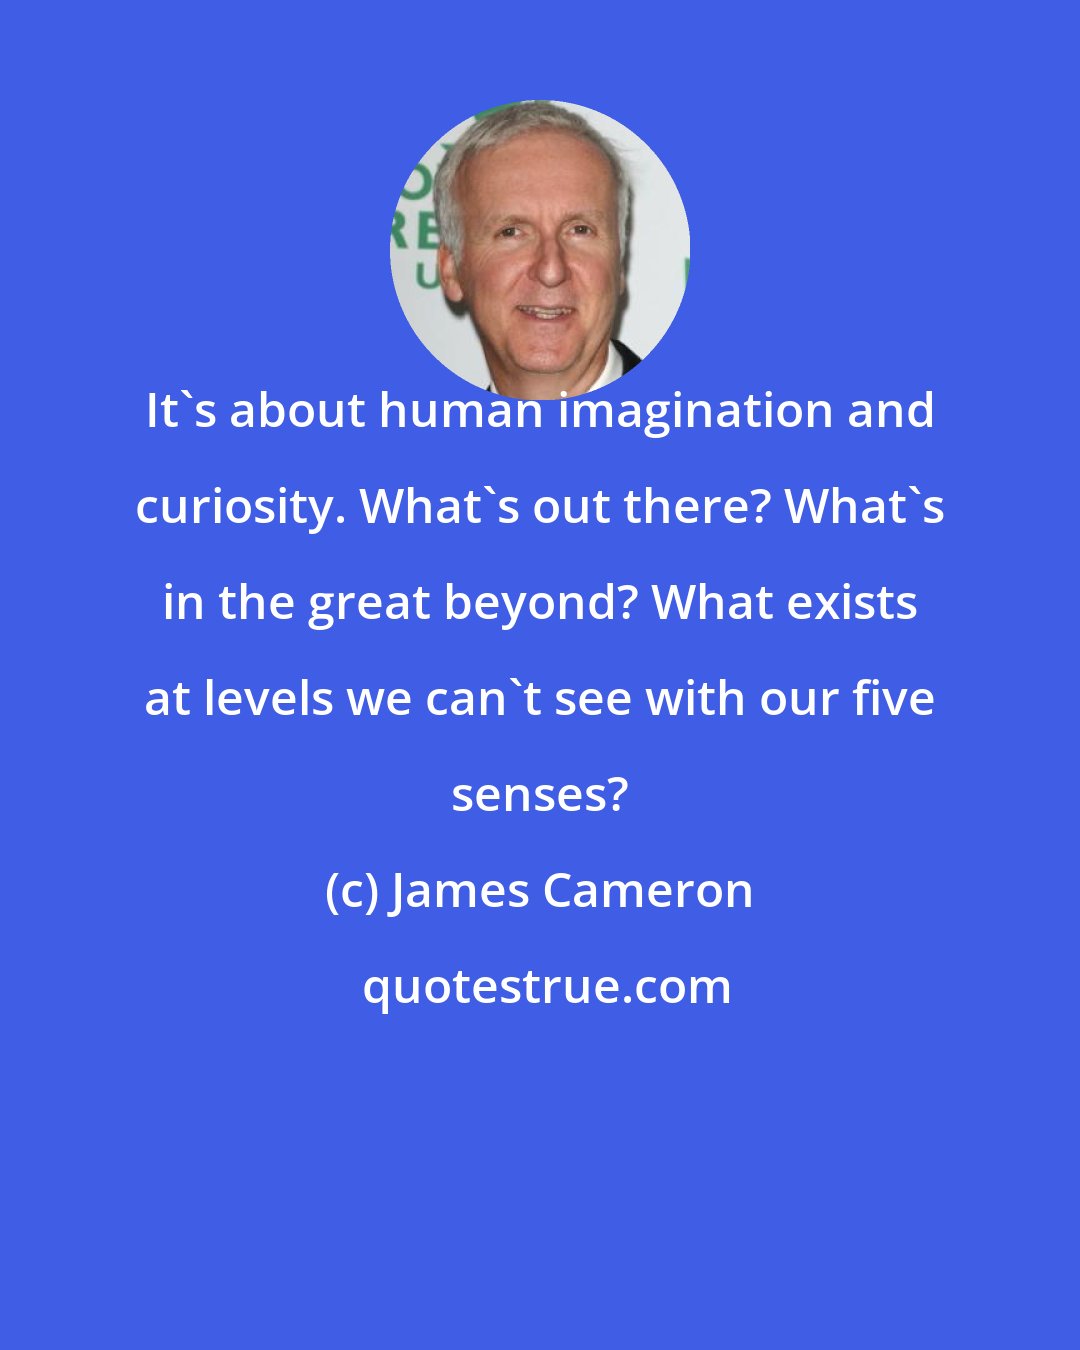 James Cameron: It's about human imagination and curiosity. What's out there? What's in the great beyond? What exists at levels we can't see with our five senses?